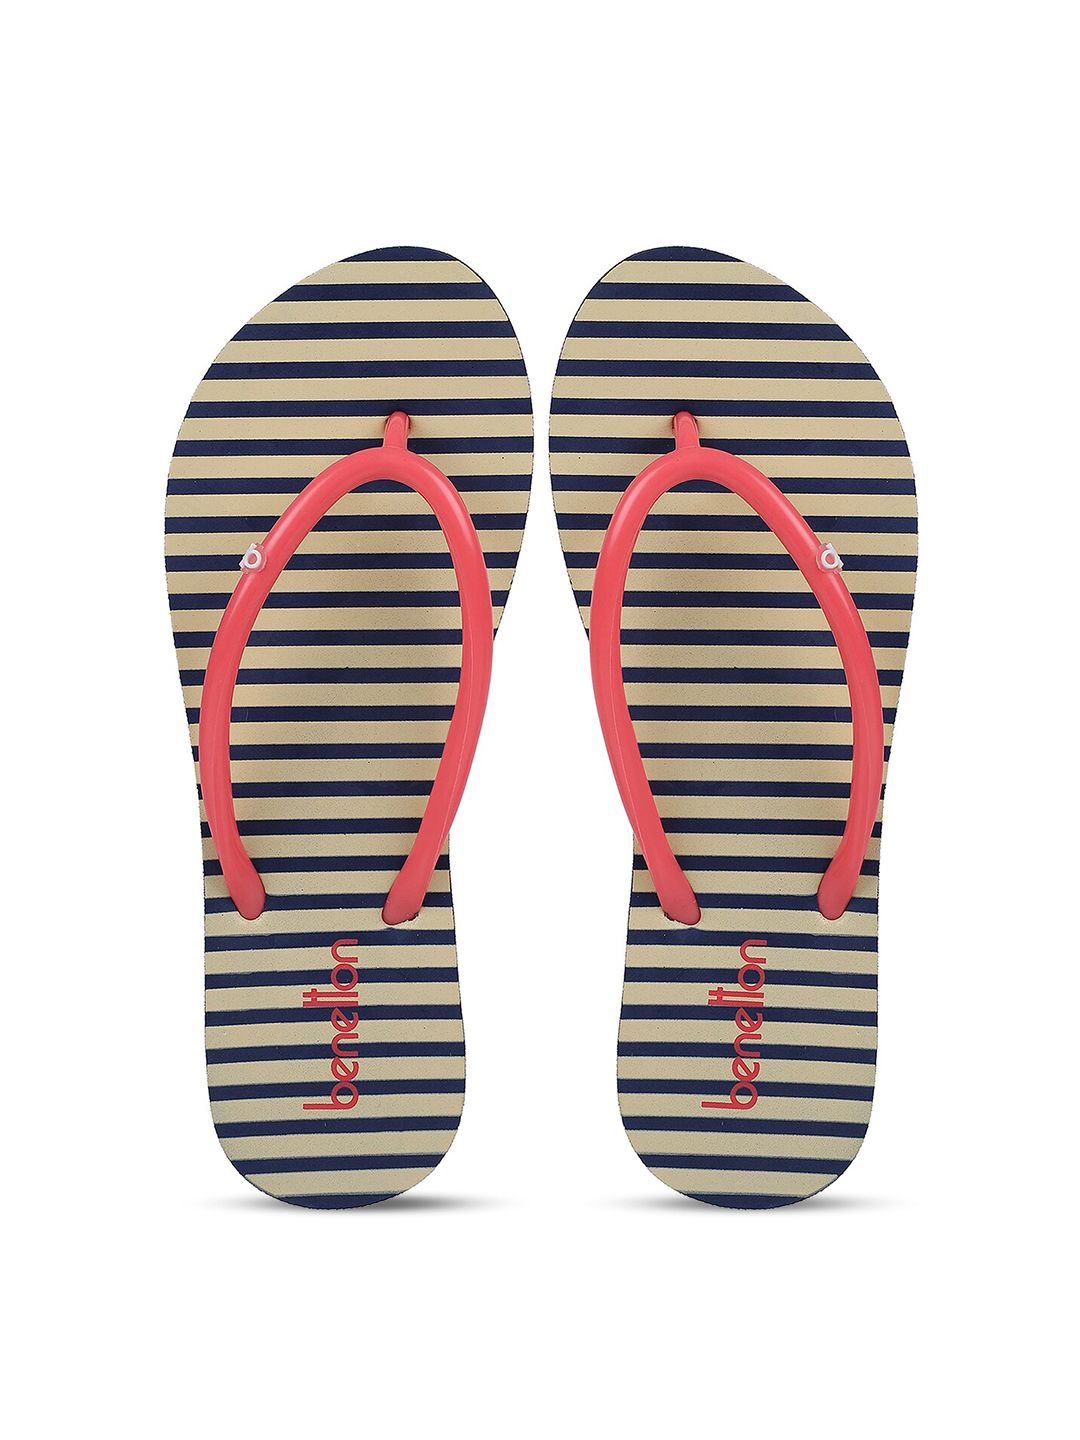 United Colors of Benetton Women Navy Blue & Beige Striped Rubber Thong Flip-Flops Price in India